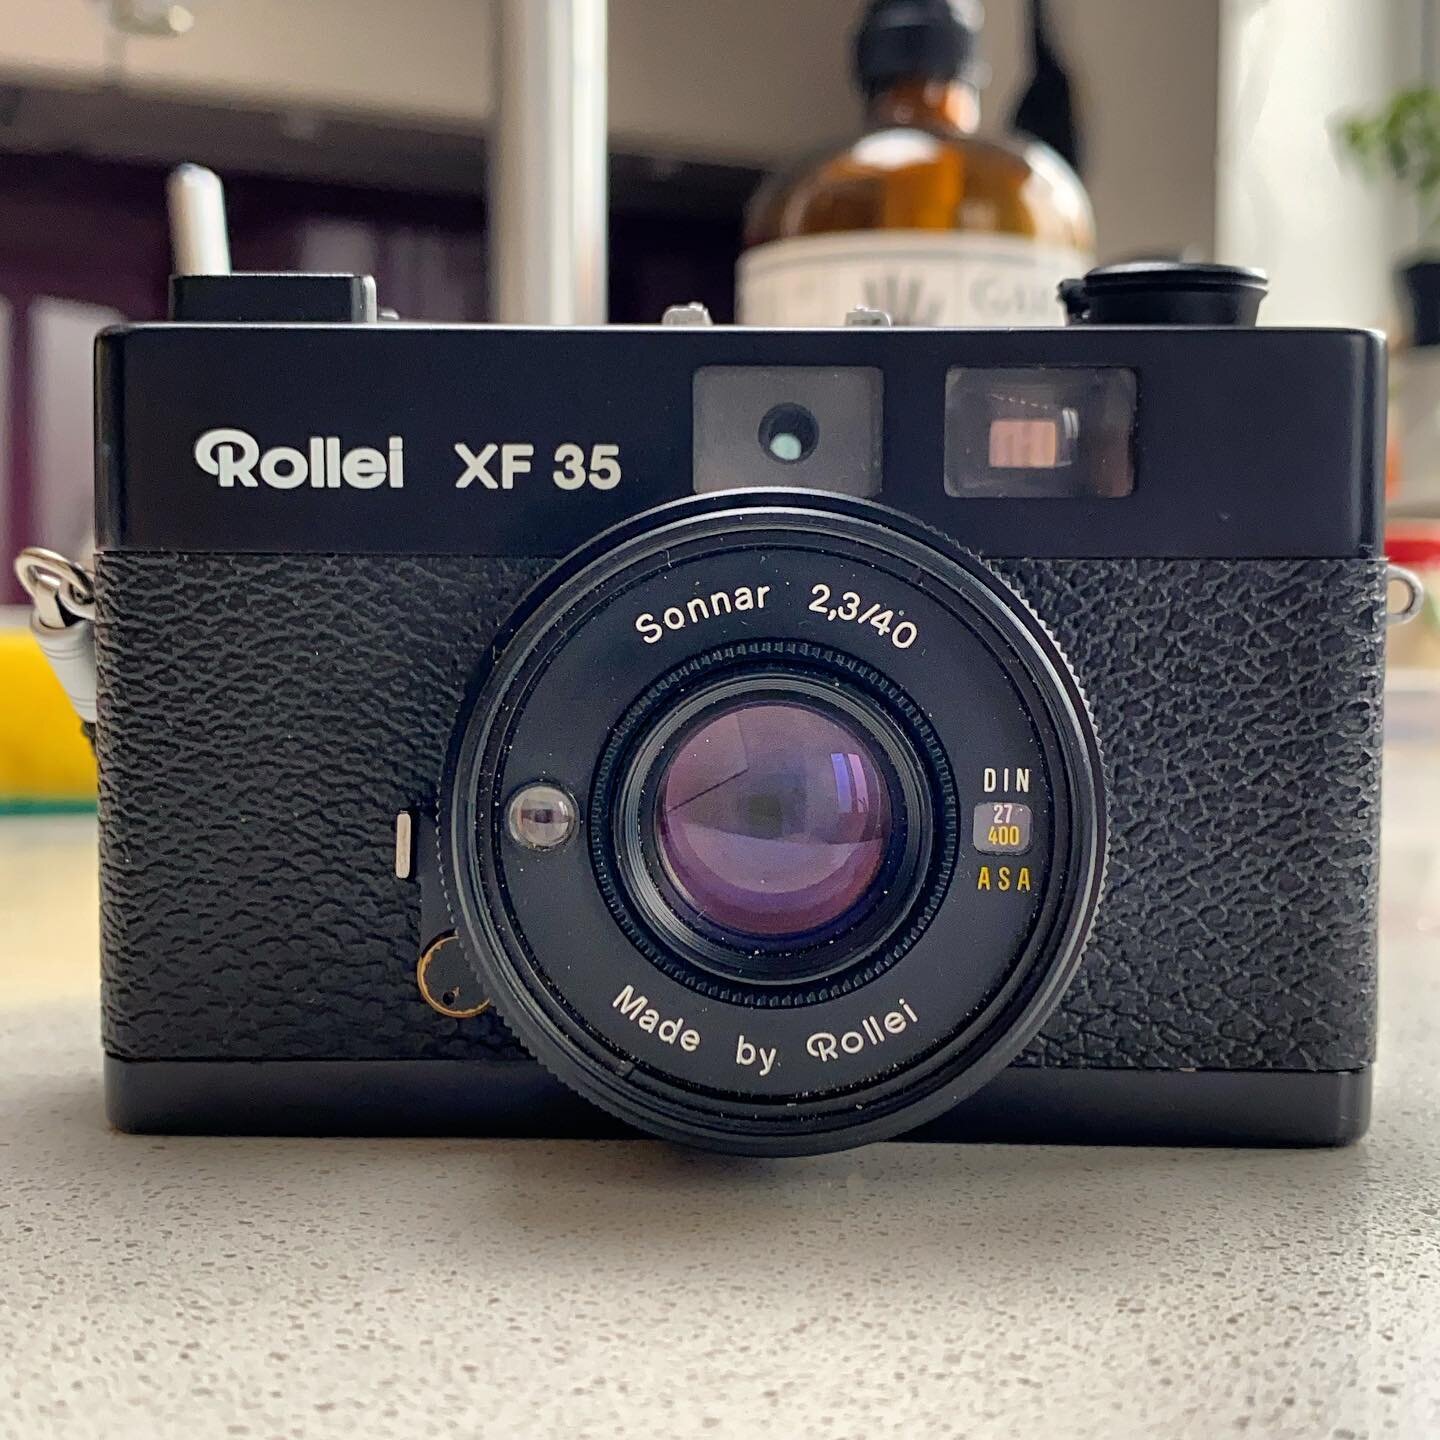 A lovely #Rollei XF35 in for a #filmtest that #Sonnar lens is a belter

#filmphotography #filmisnotdead #filmcommunity #camerarepairs